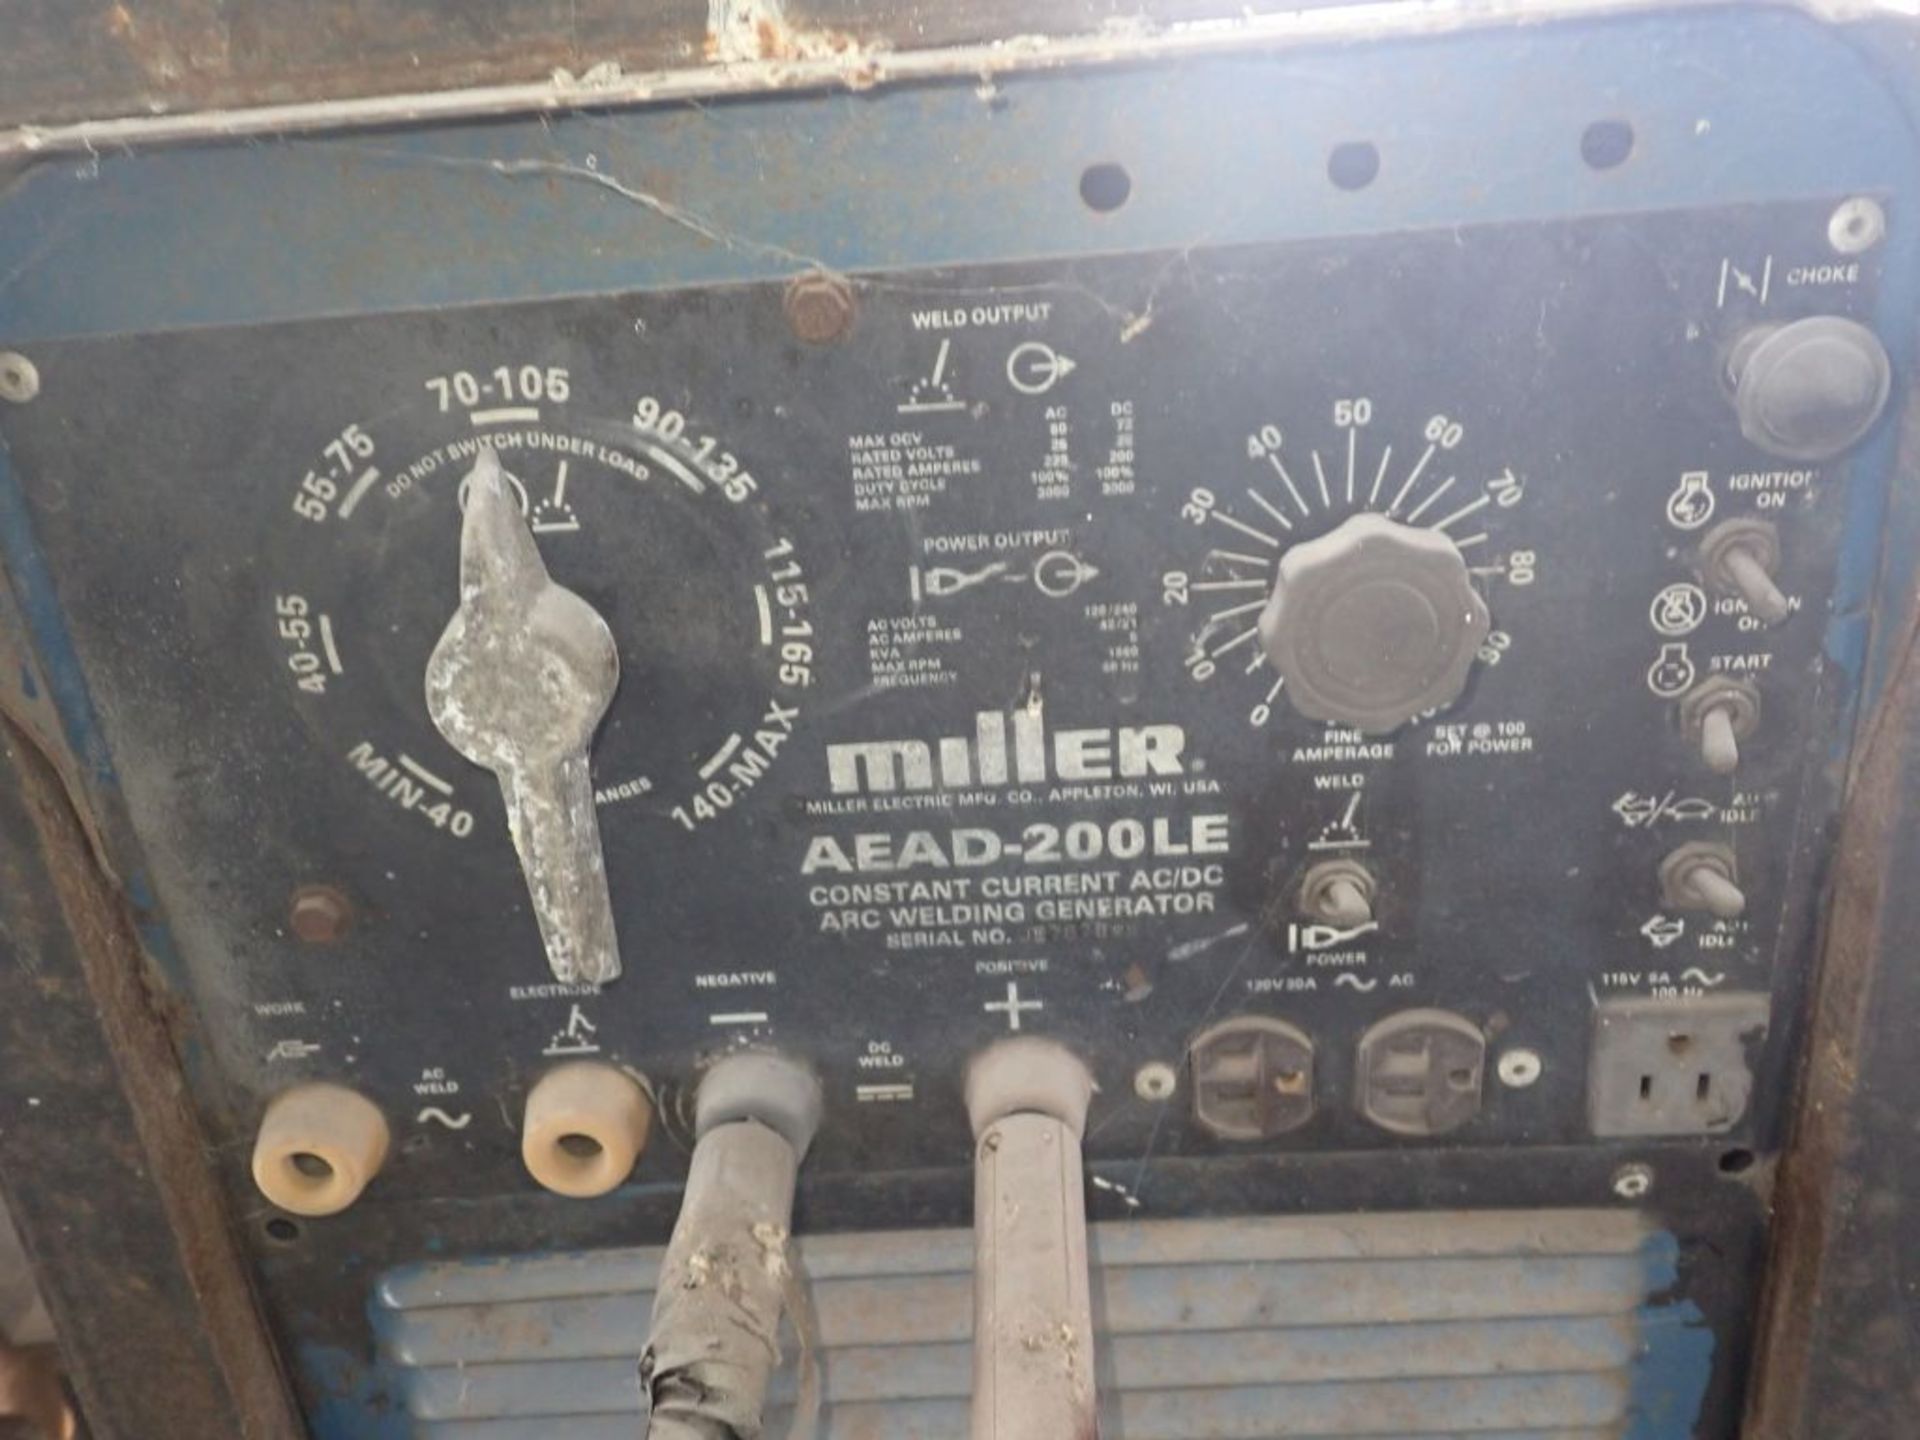 Miller Welding Generator AC/DC AEAD-200LE | Wield Output: 25V, 2000 RPM; Power Outage: 120/420V, - Image 5 of 14